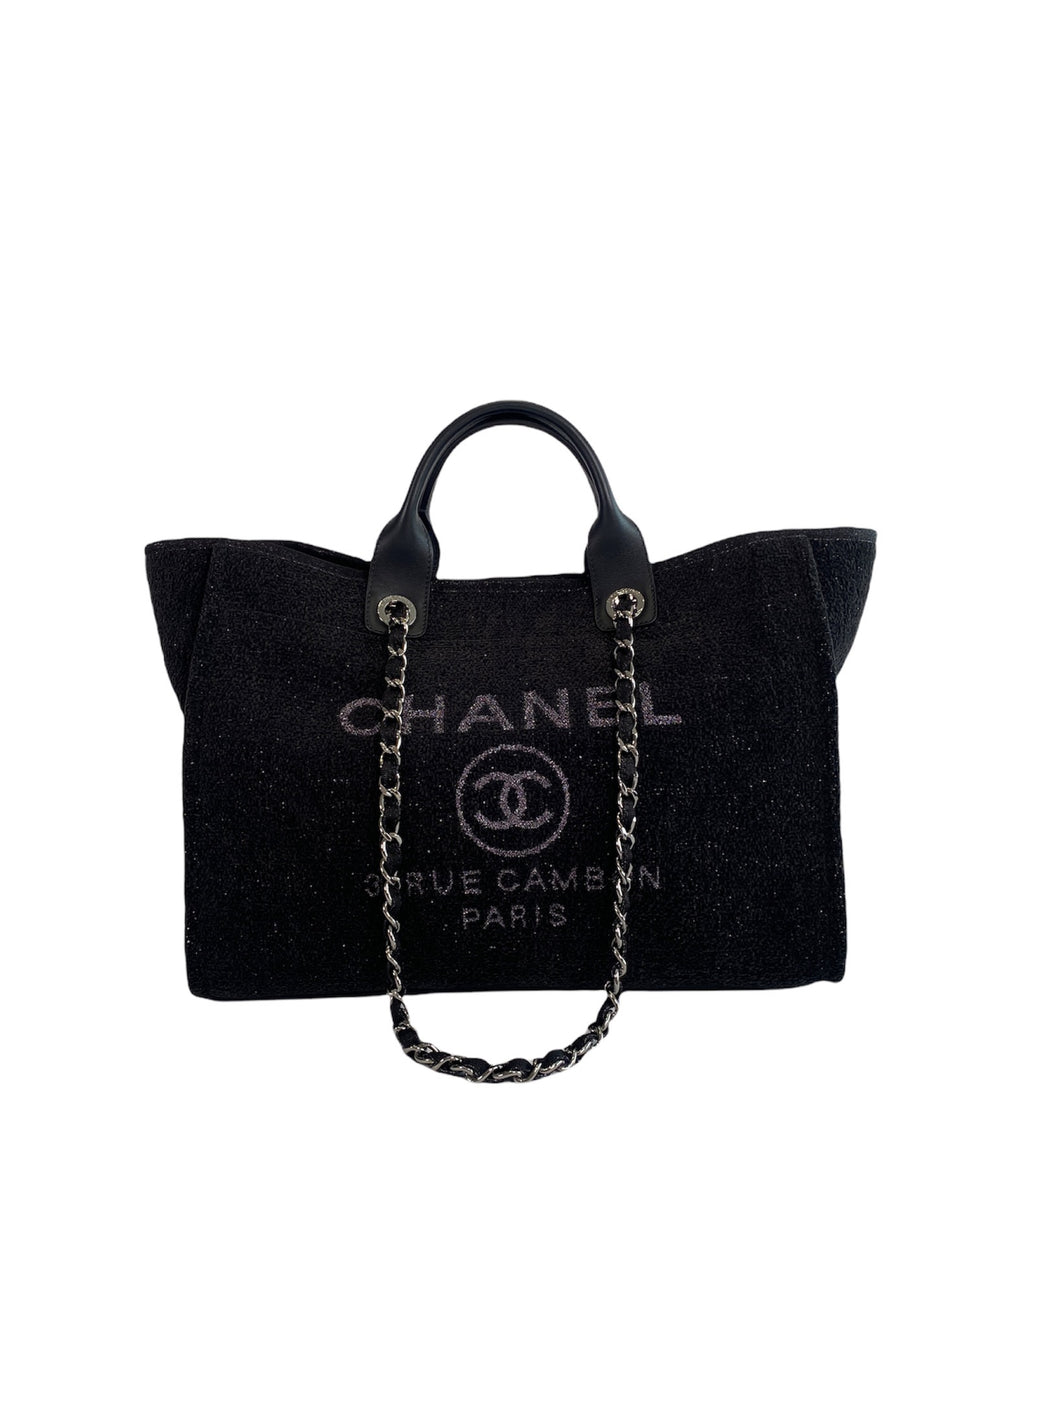 Chanel Deauville Tote Bag